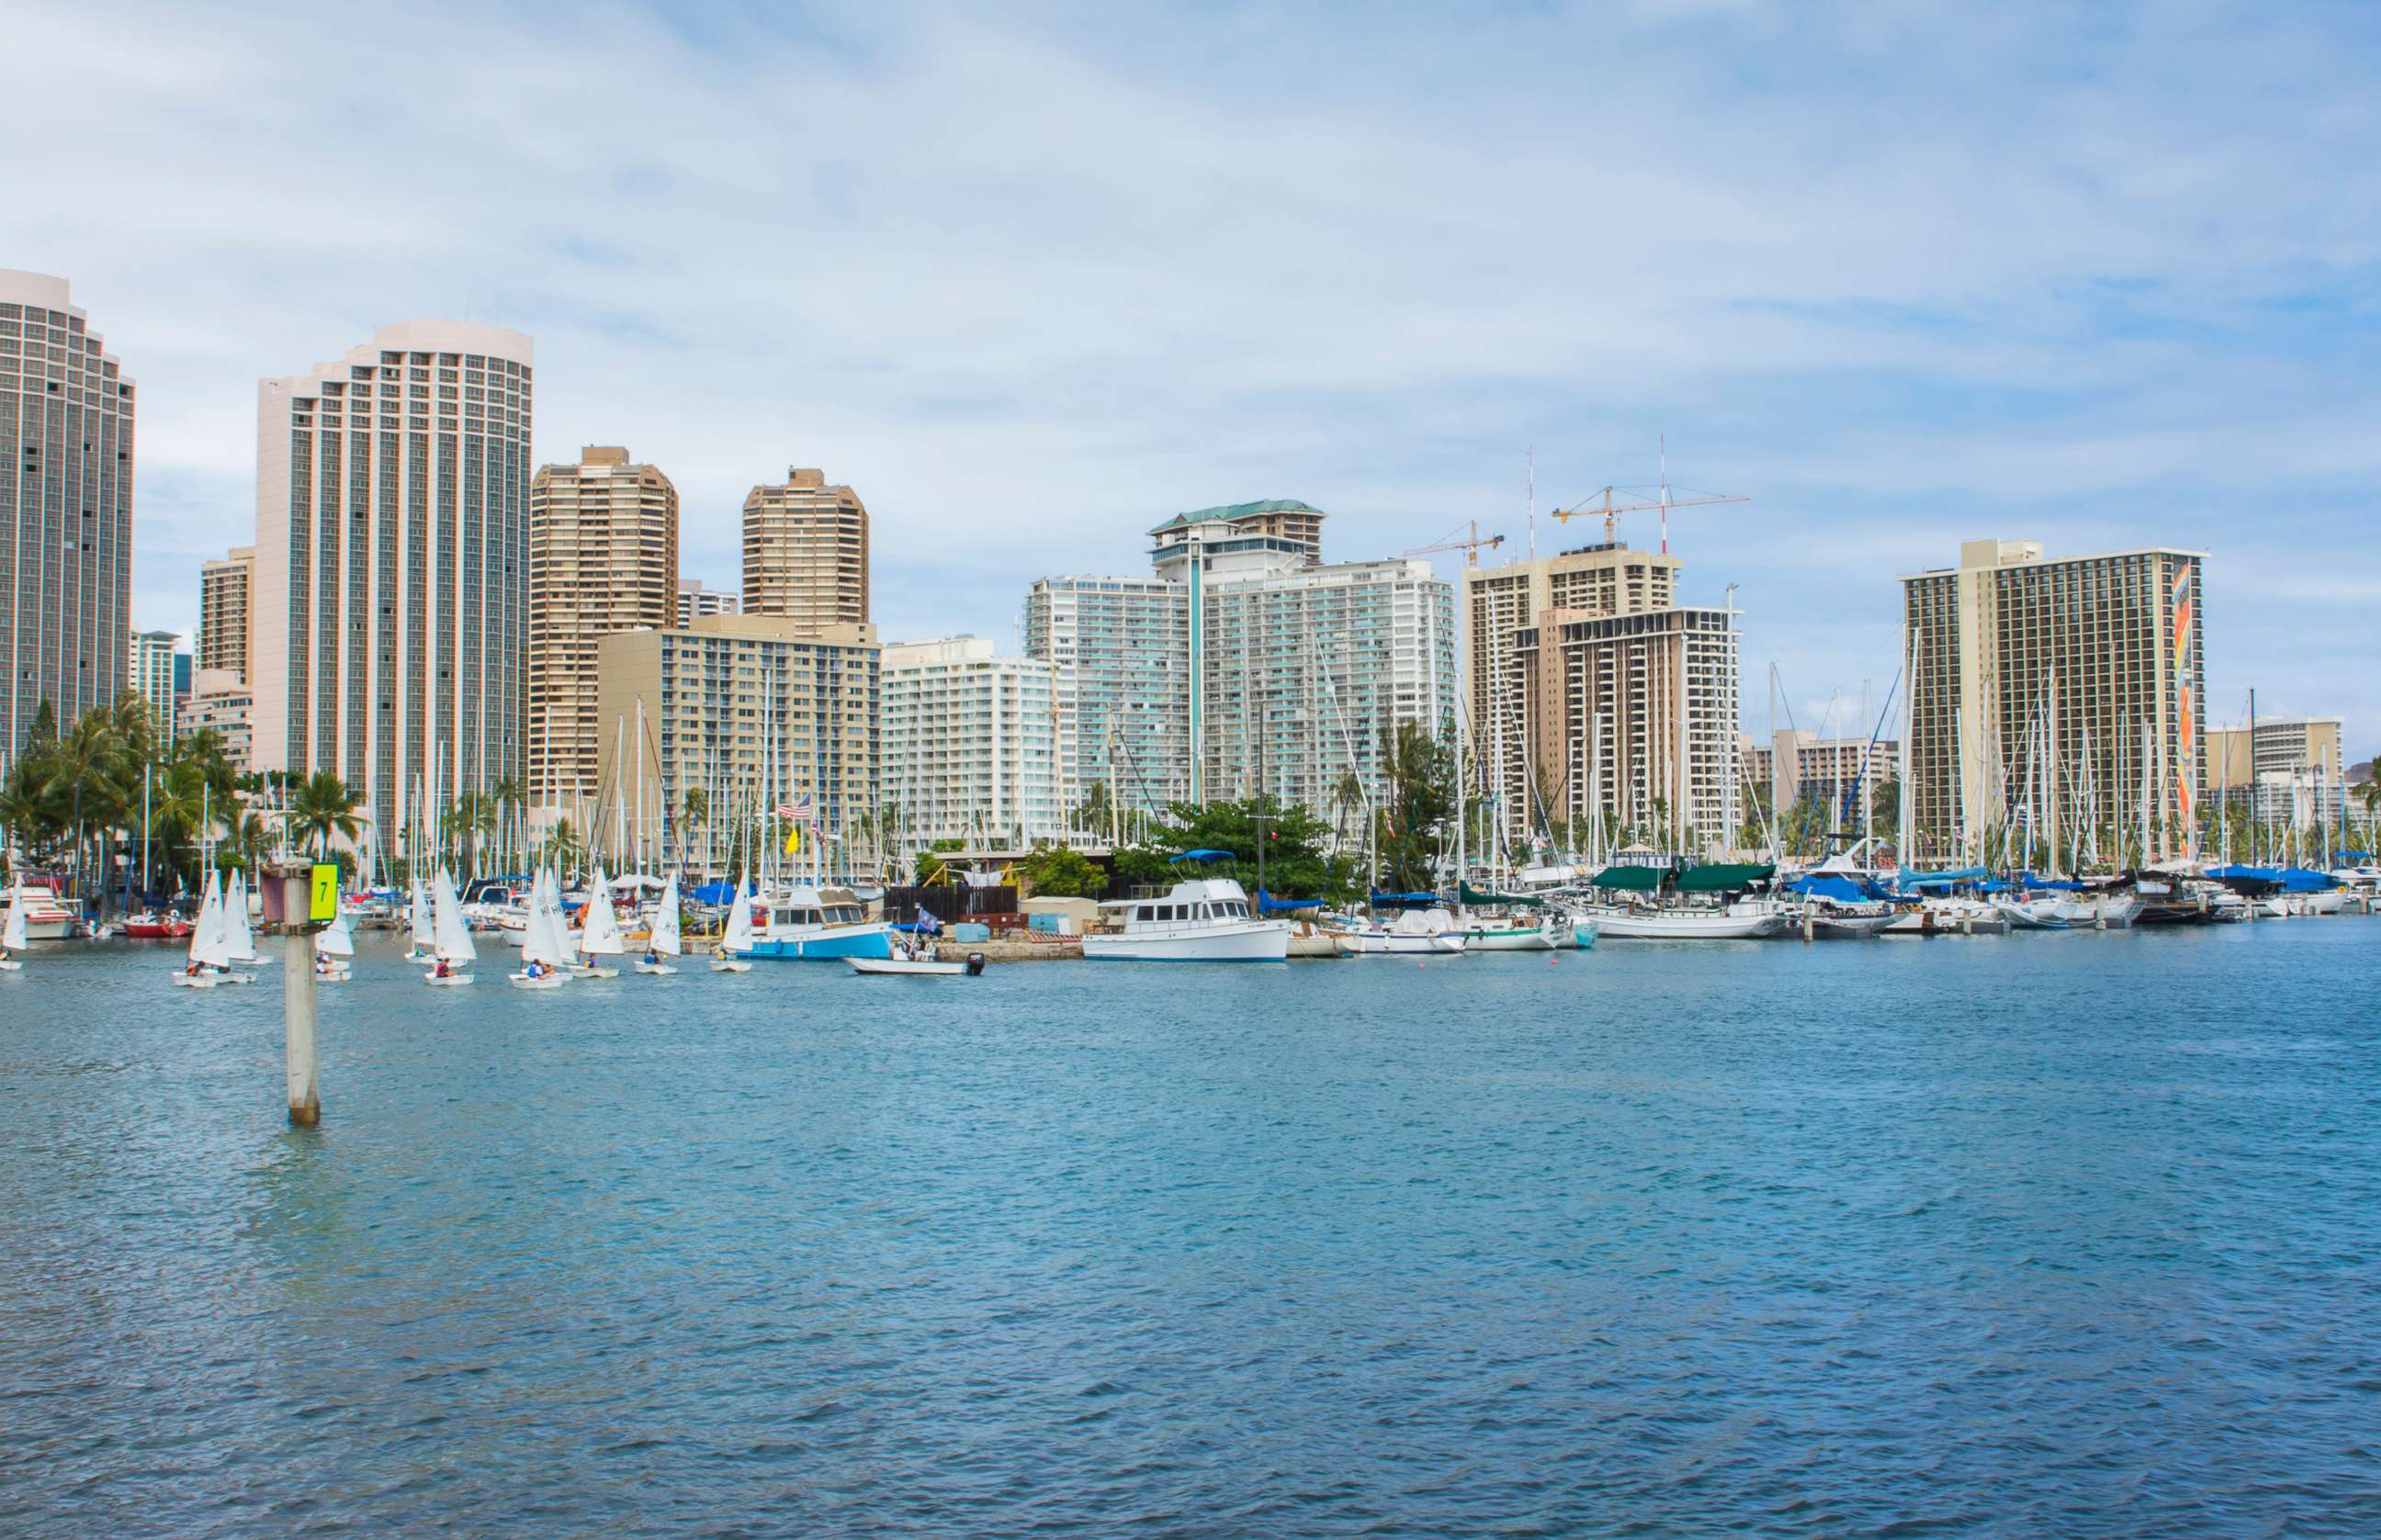 PHOTO: The skyline of Honolulu is captured from a boat marina.